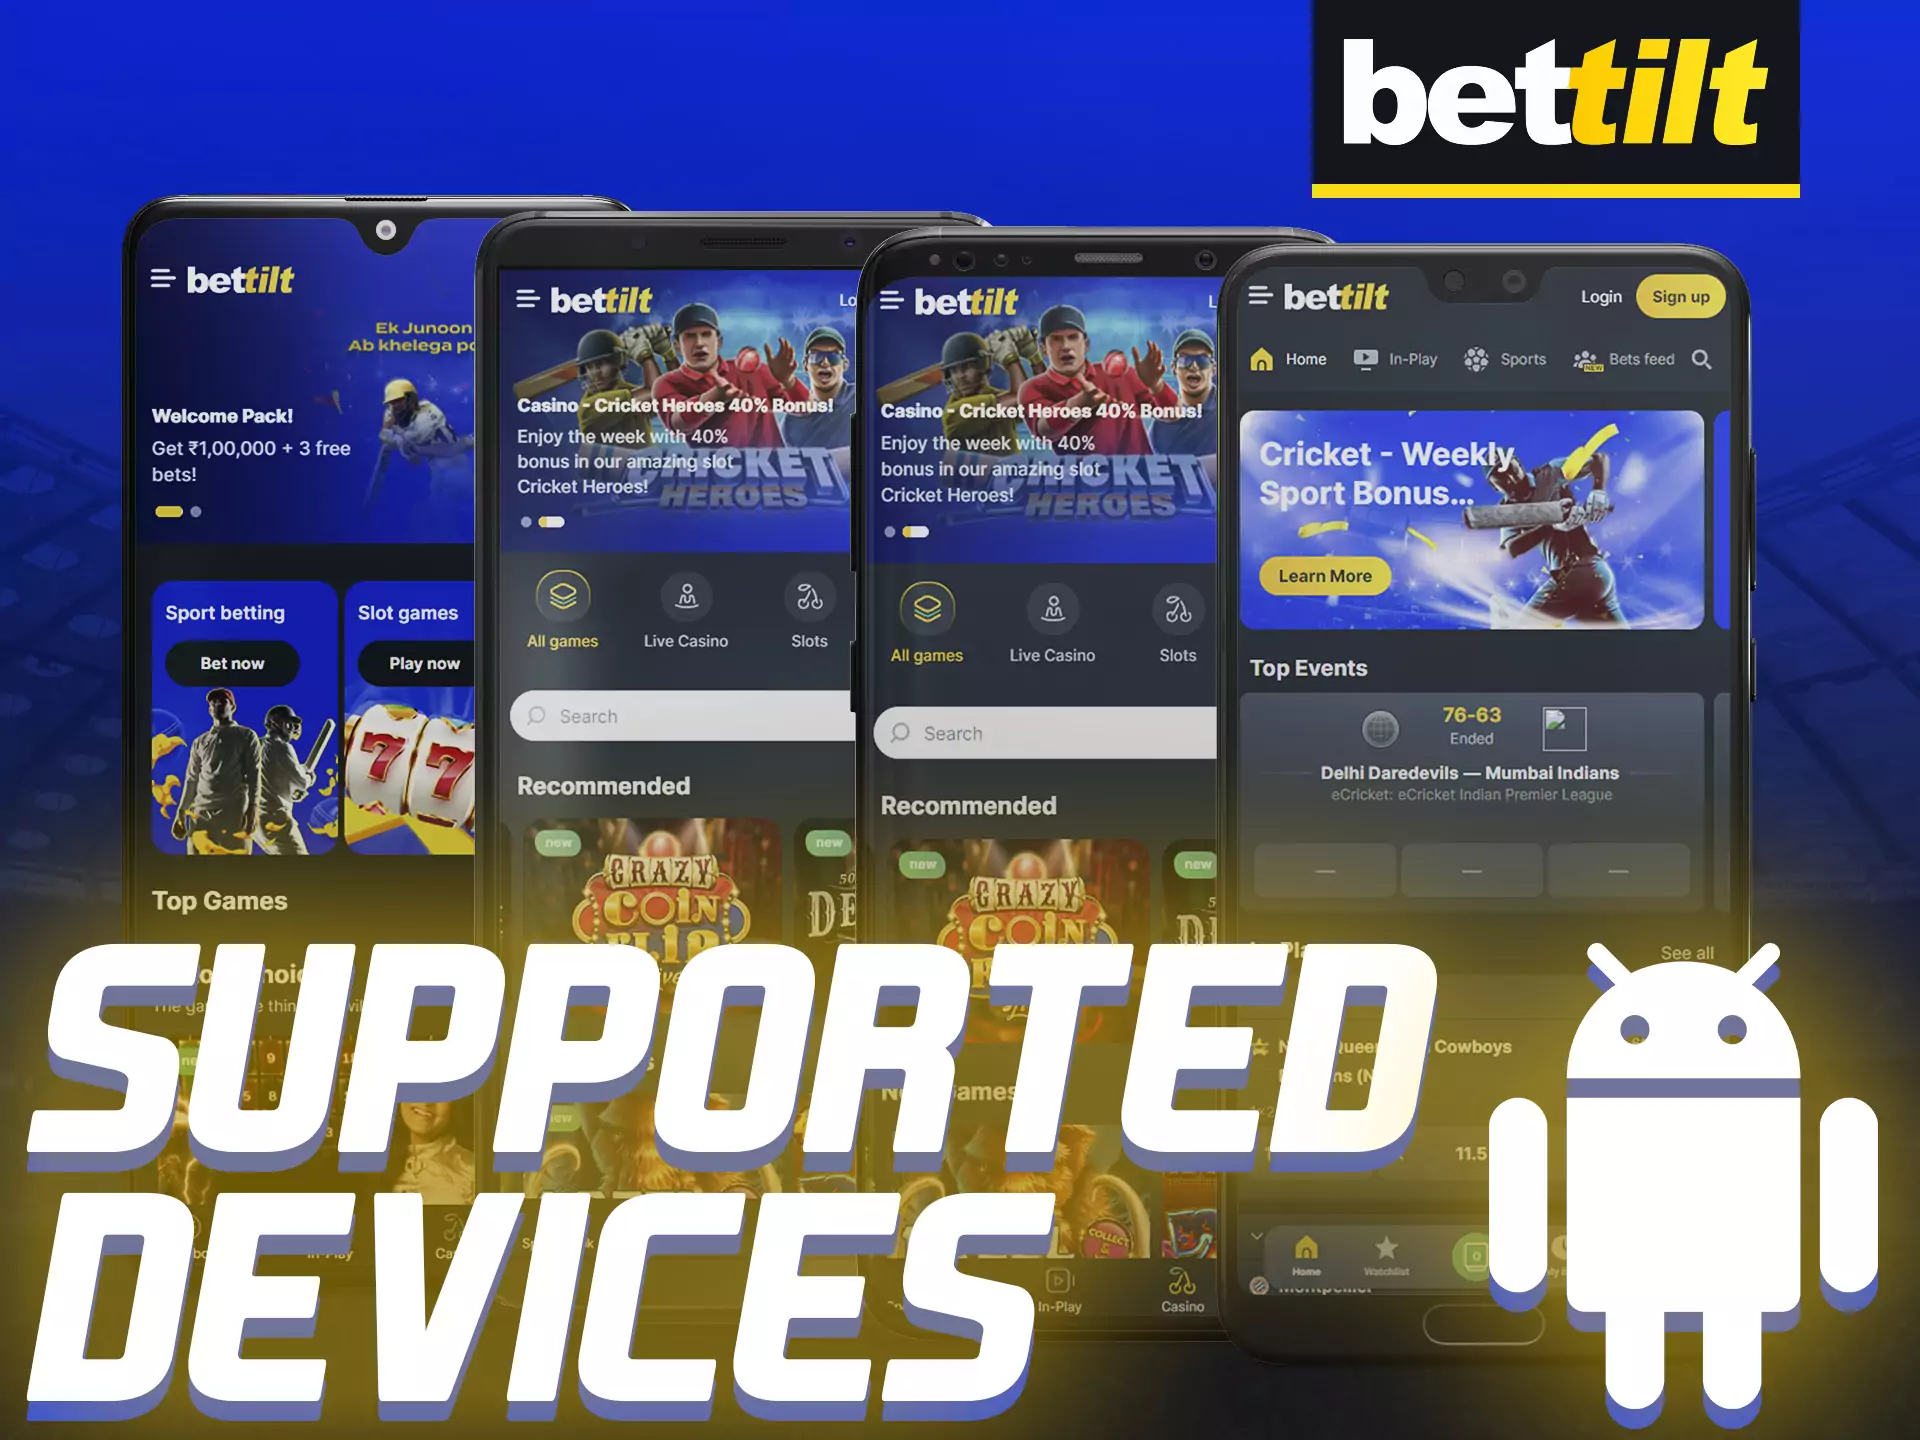 Bettilt app is supported on various Android devices.